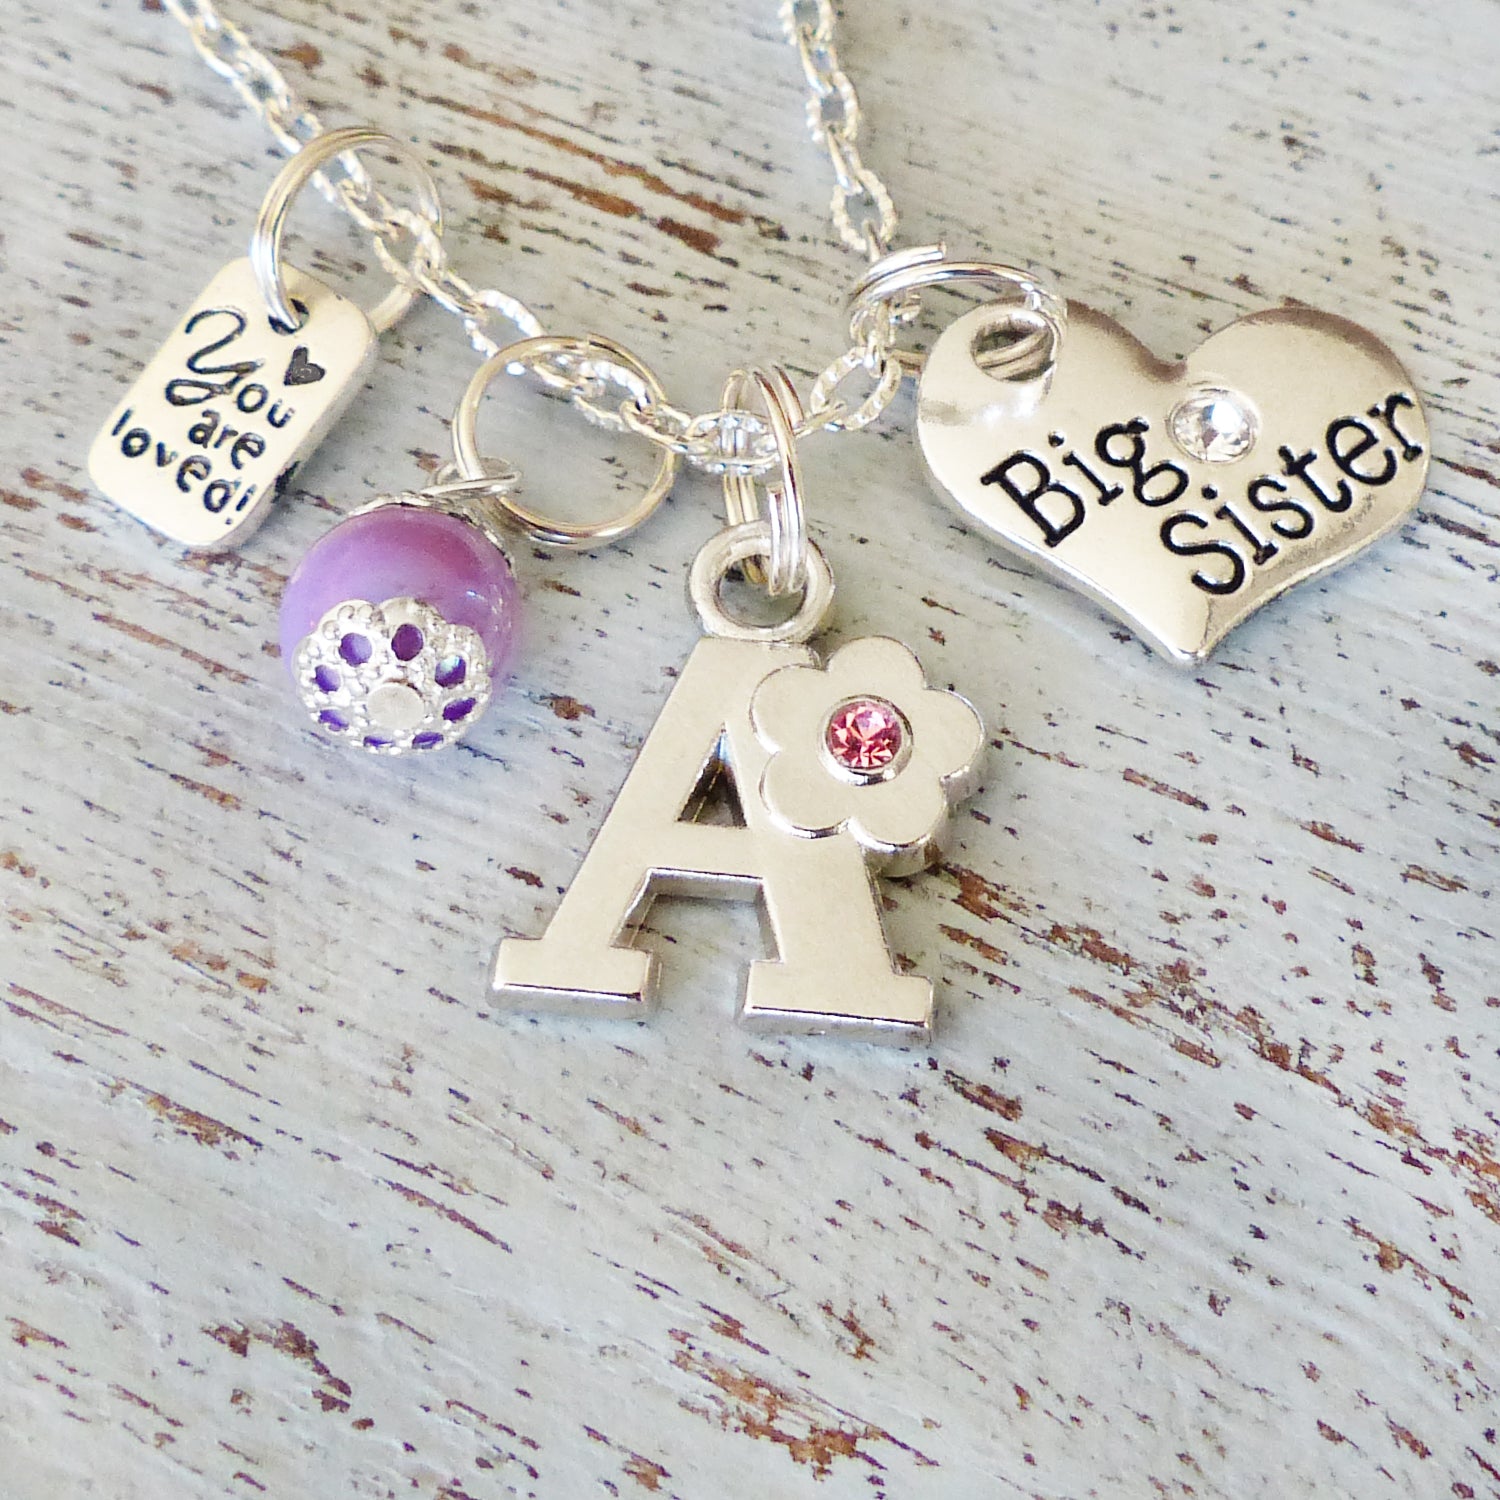 Big Sister Gift-Personalized Gift for Big Sister- Flower Letter Charm-Initial Necklace,Gifts for Girls, You are loved-Charm Necklace, Purple